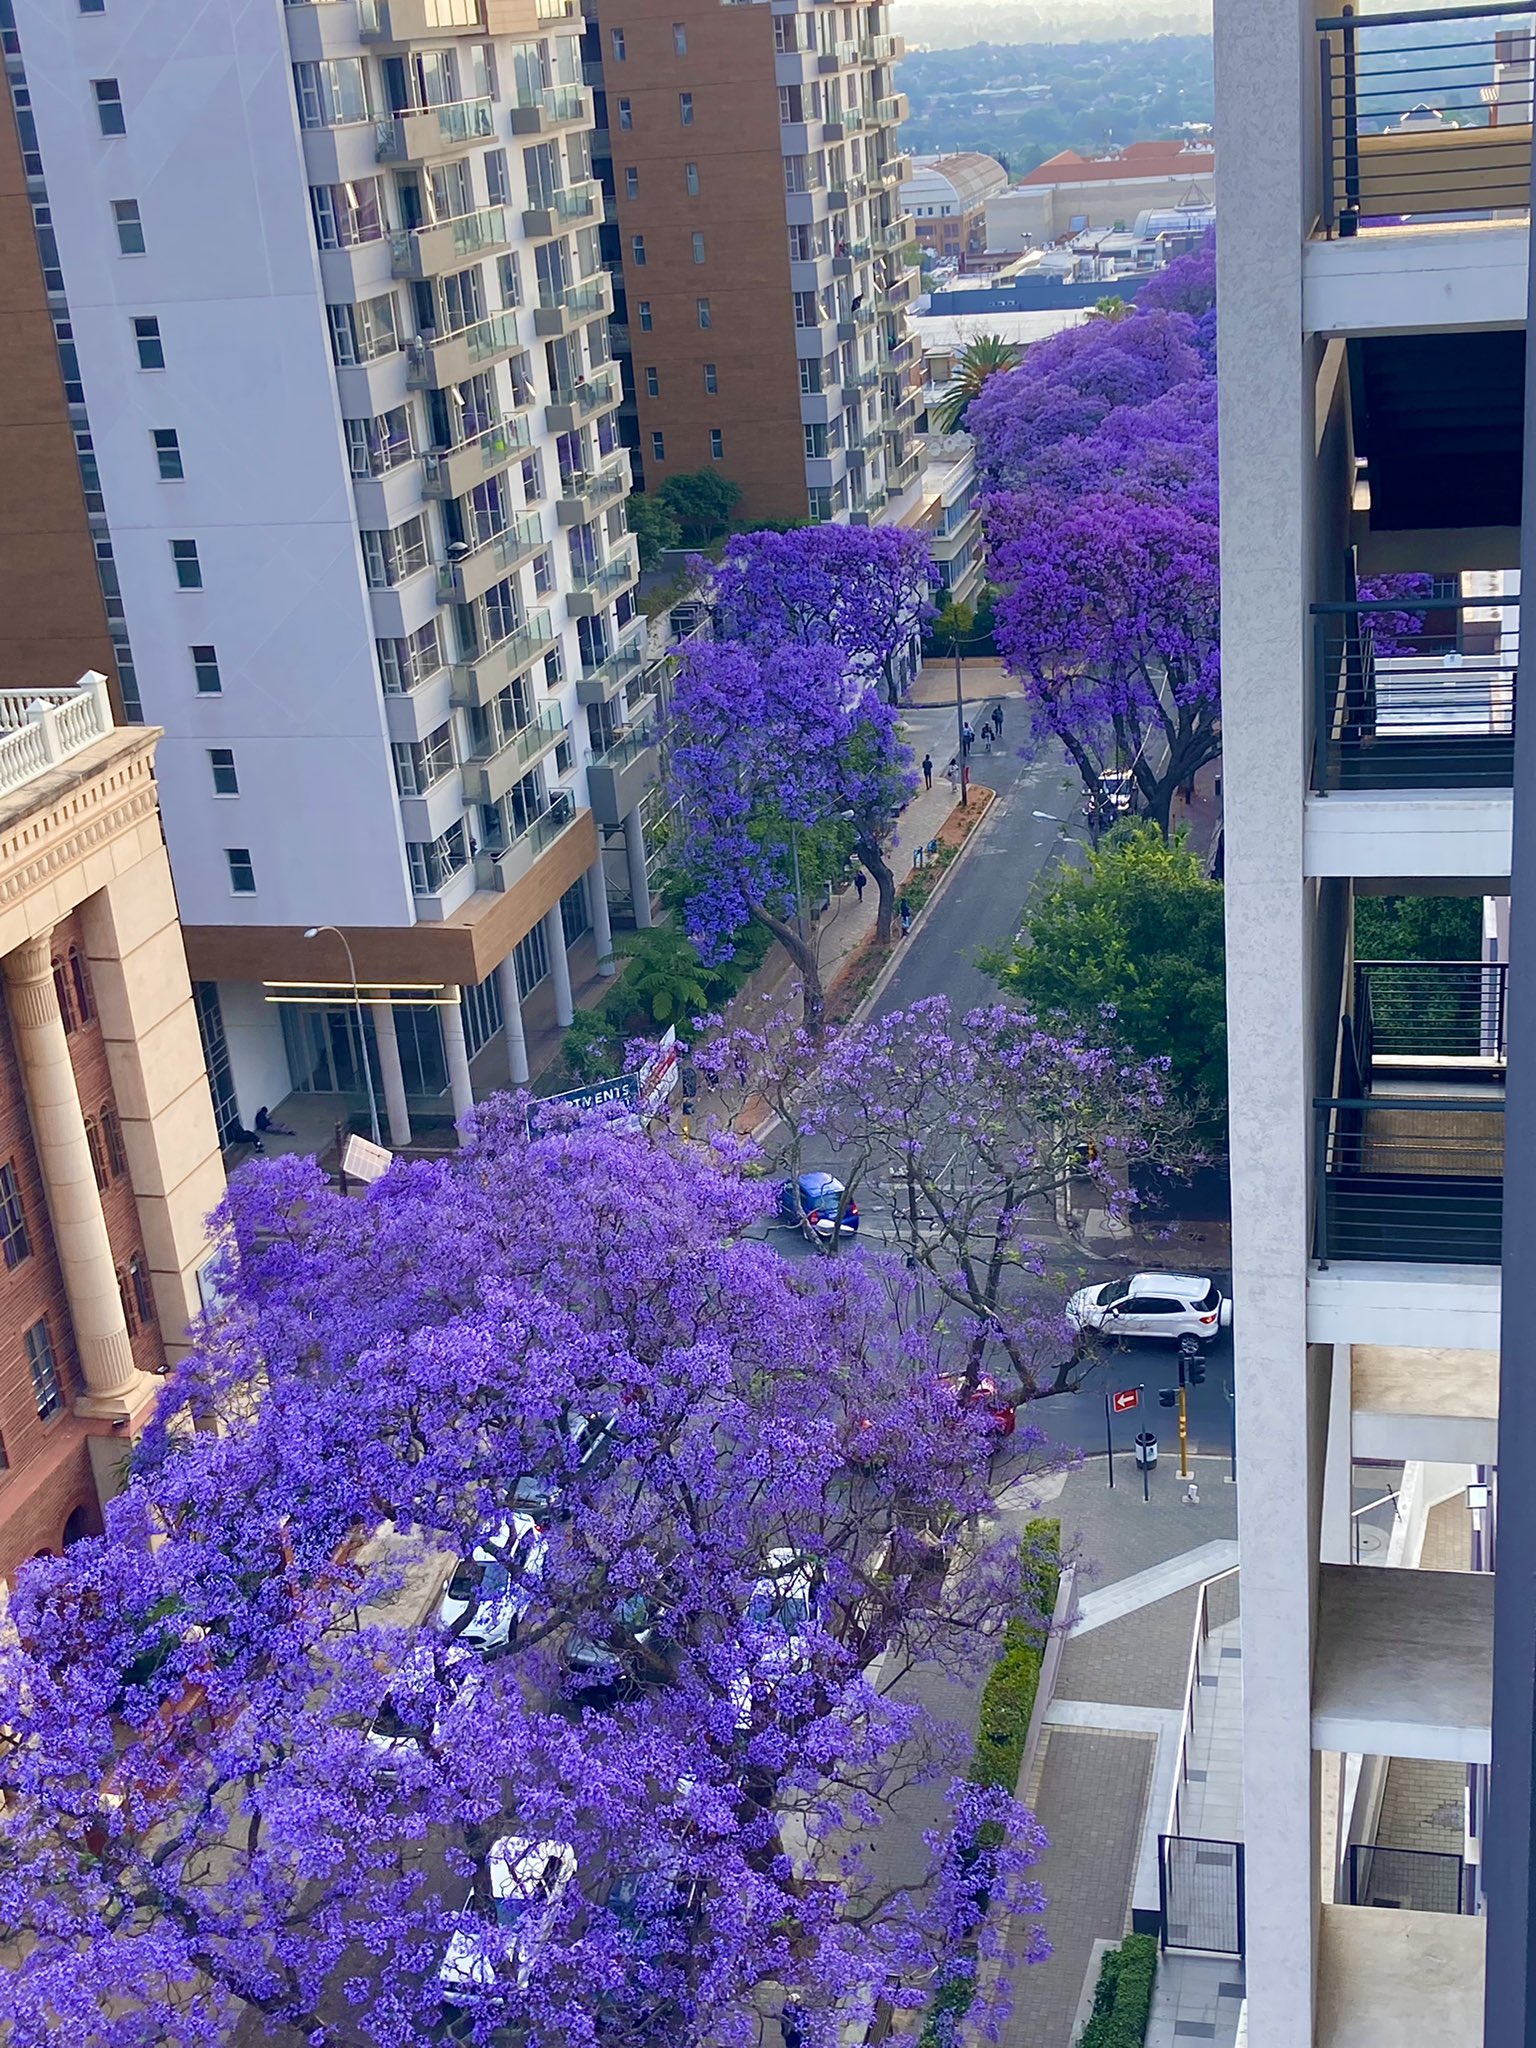 Carl Niehaus on Twitter: "I just love living in Rosebank, a far more South  African and cosmopolitan suburb than the snooty and pretentious  neighbouring Sandton. This time of the year with the